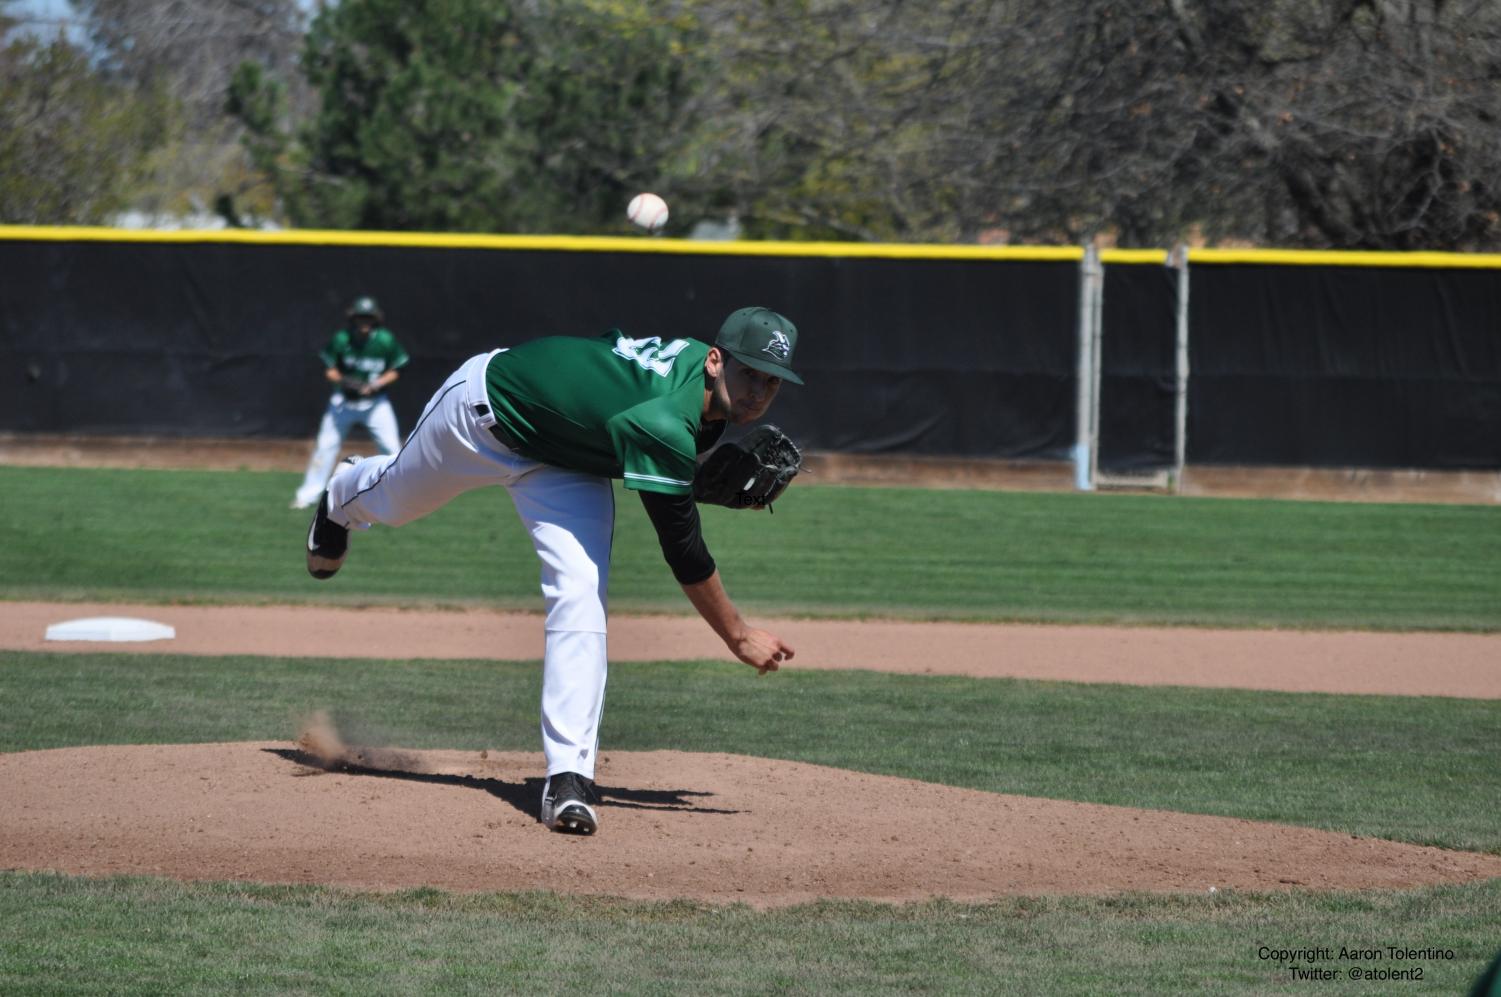 Nate Jenkins releases a pitch during his complete-game victory over Sierra College at Diablo Valley College in Pleasant Hill, California on March 26, 2018. | Photo by Aaron Tolentino